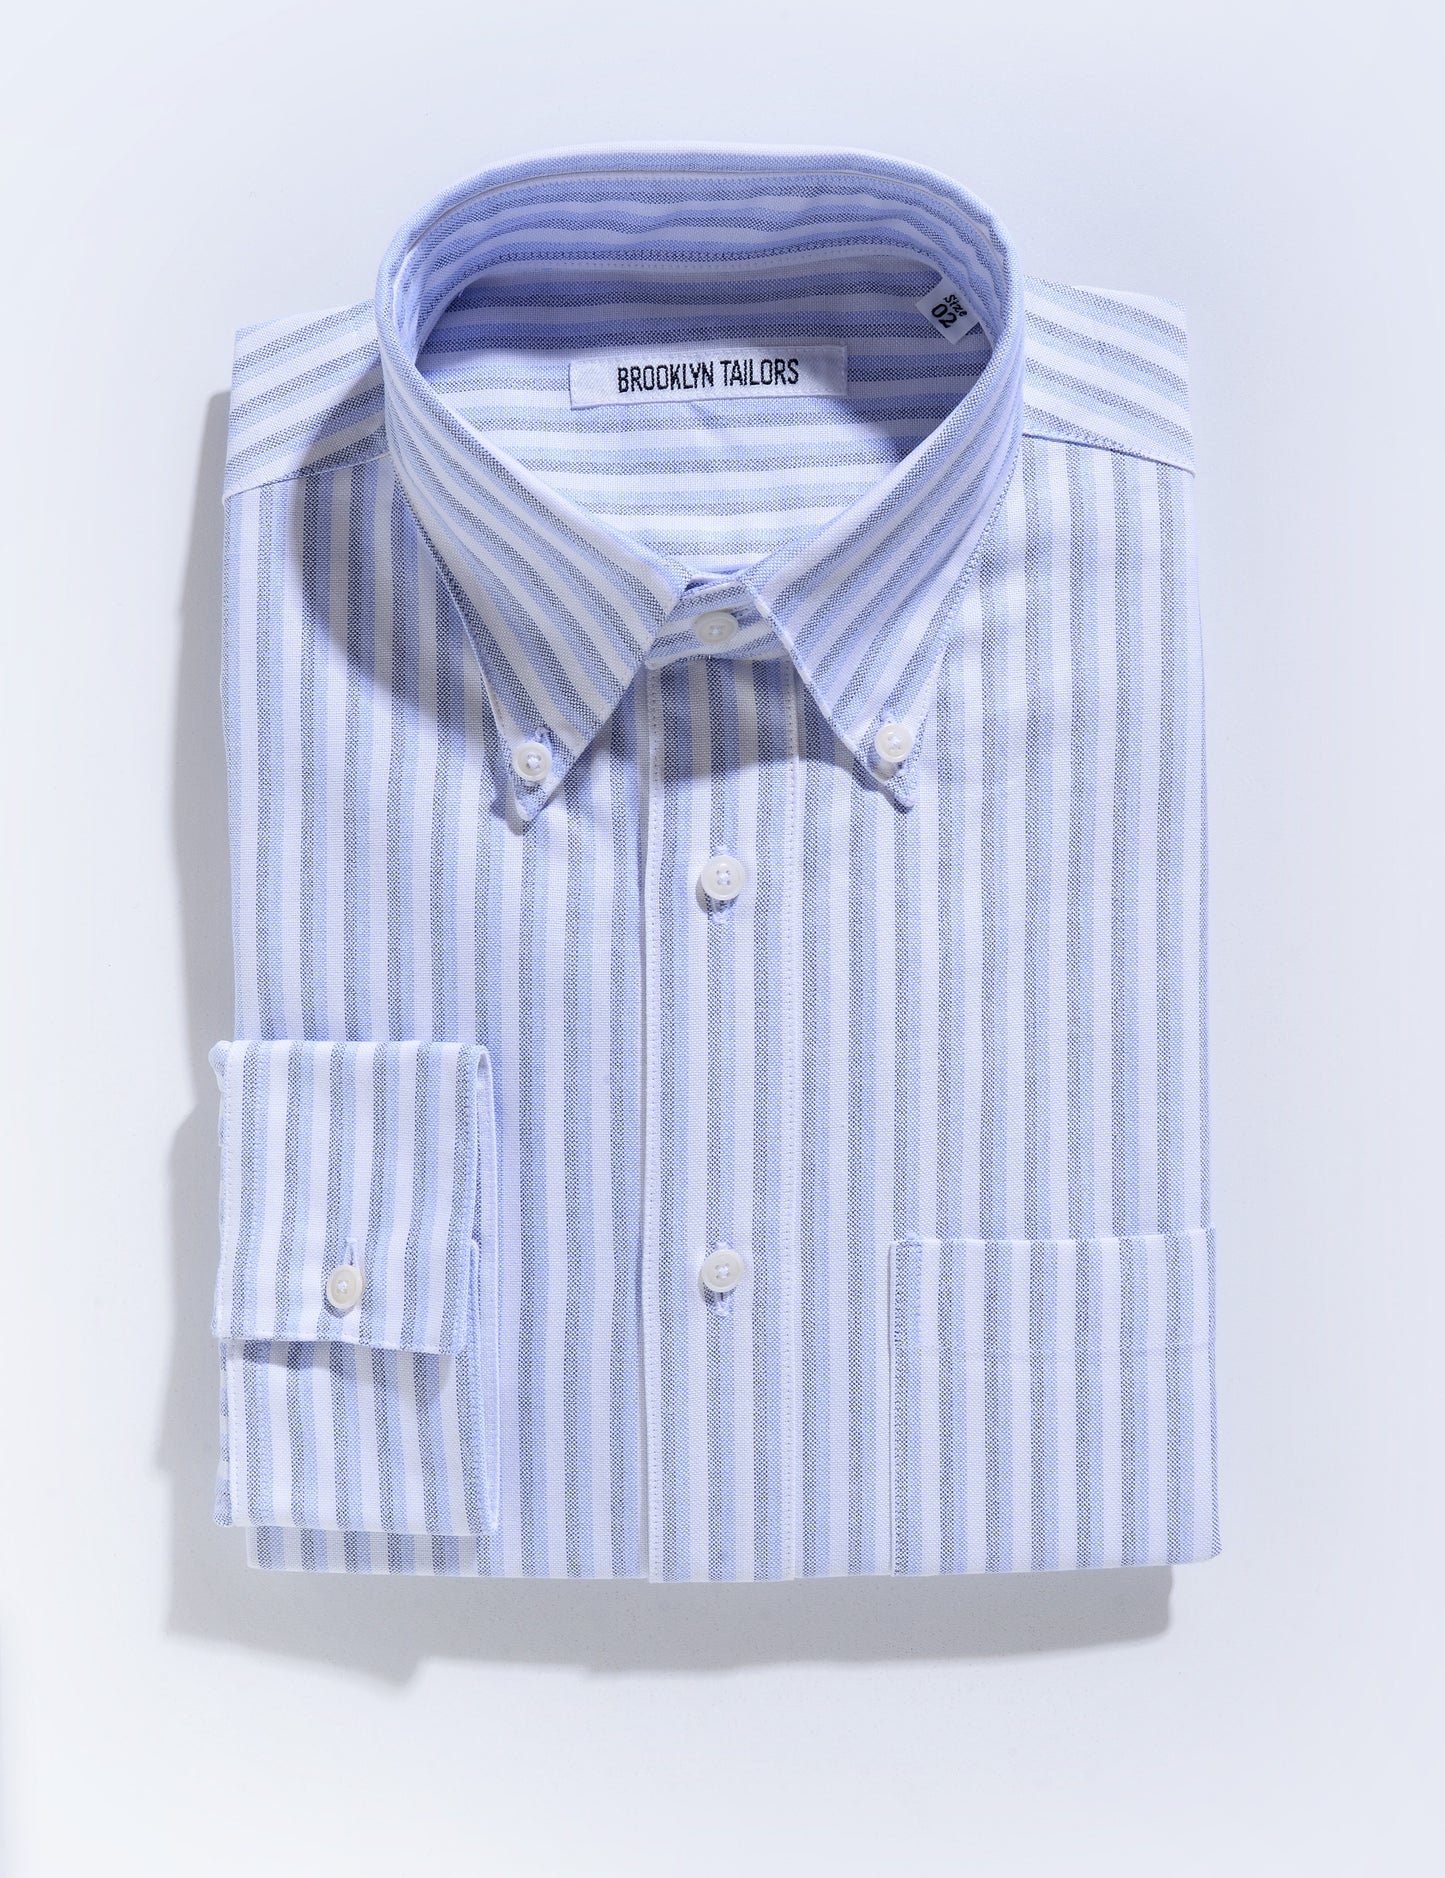 Brooklyn Tailors BKT14 Relaxed Shirt in Double-Stripe Cotton Oxford - Blue & White folded flat shot